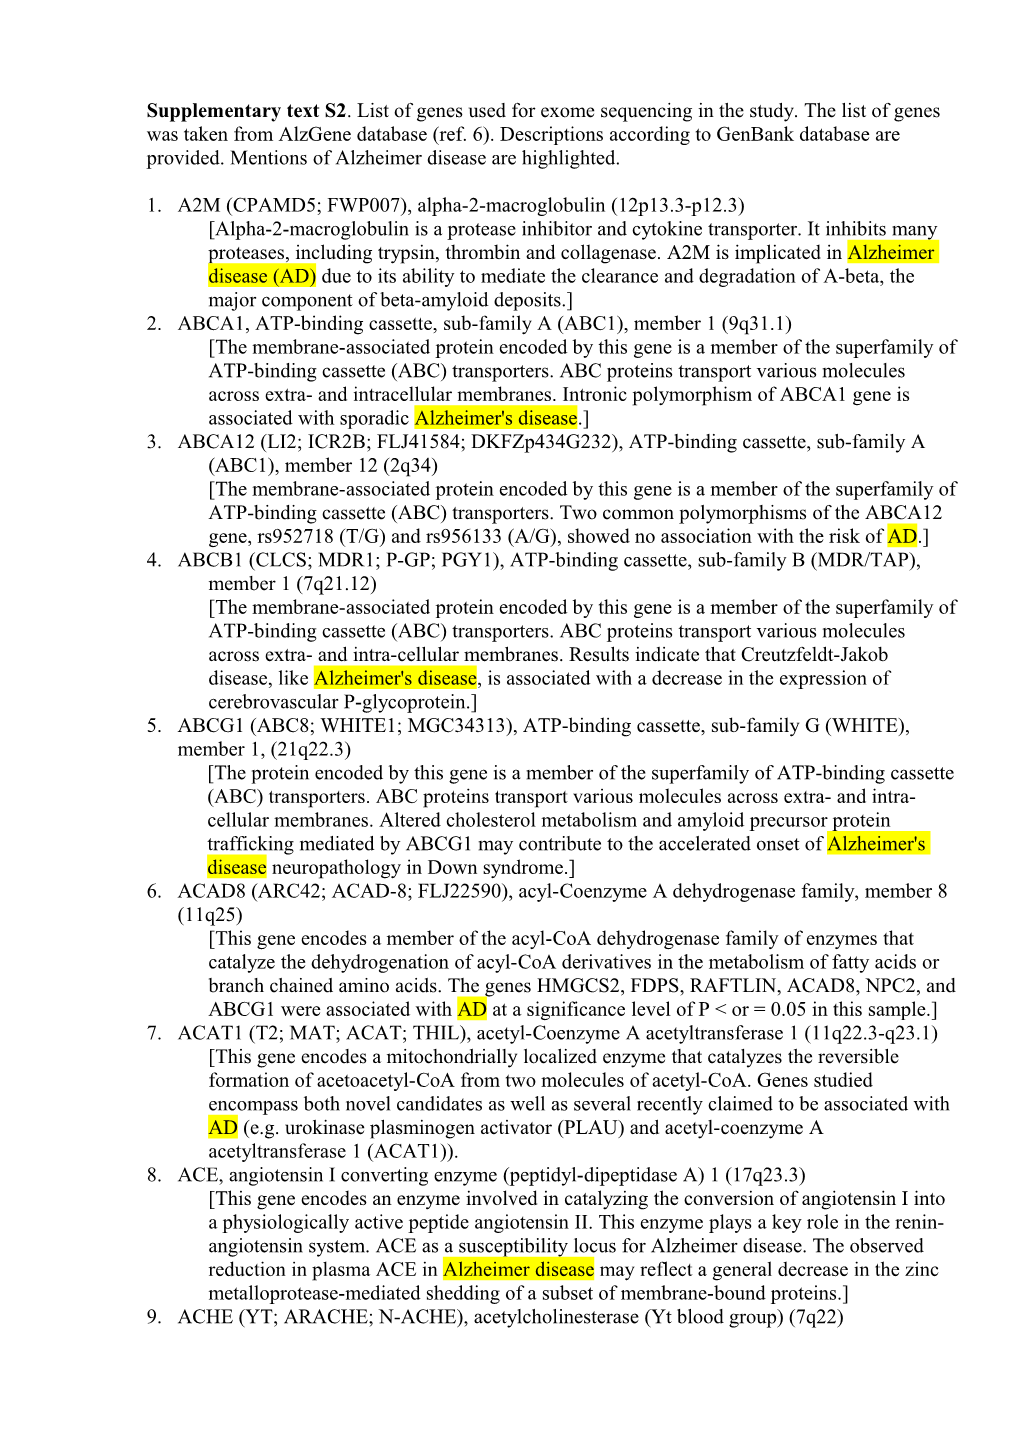 Supplementary Text S2 . List of Genes Used for Exome Sequencing in the Study. the List